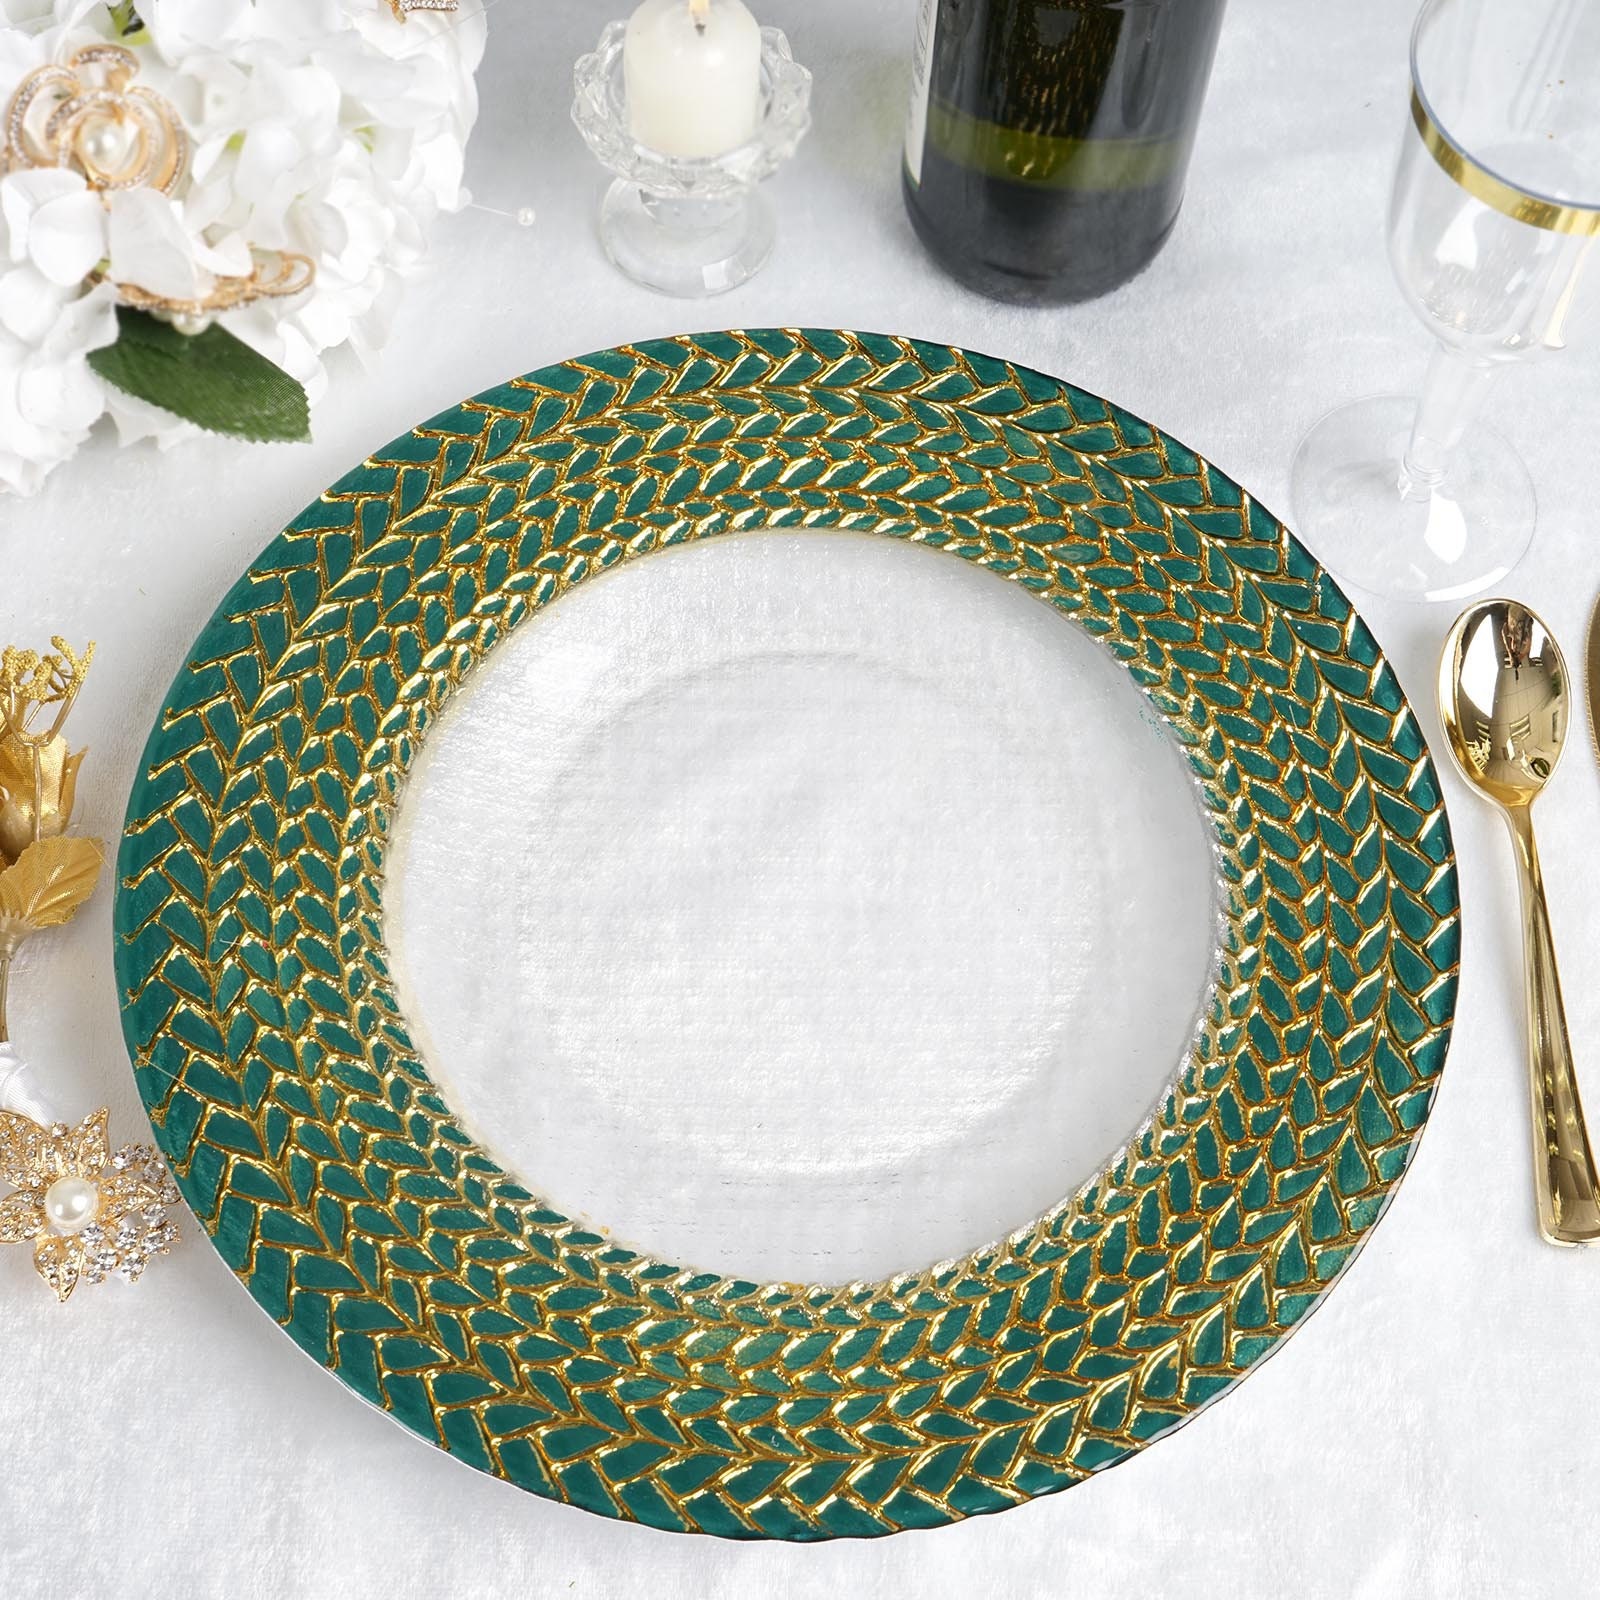 Luxe Dinner Parties and Special Events Reef Glass 13 Charger Plate Urquid Linen Pearl Use for Elegant Wedding Décor and Any Elegant Occassion Set Of 4 